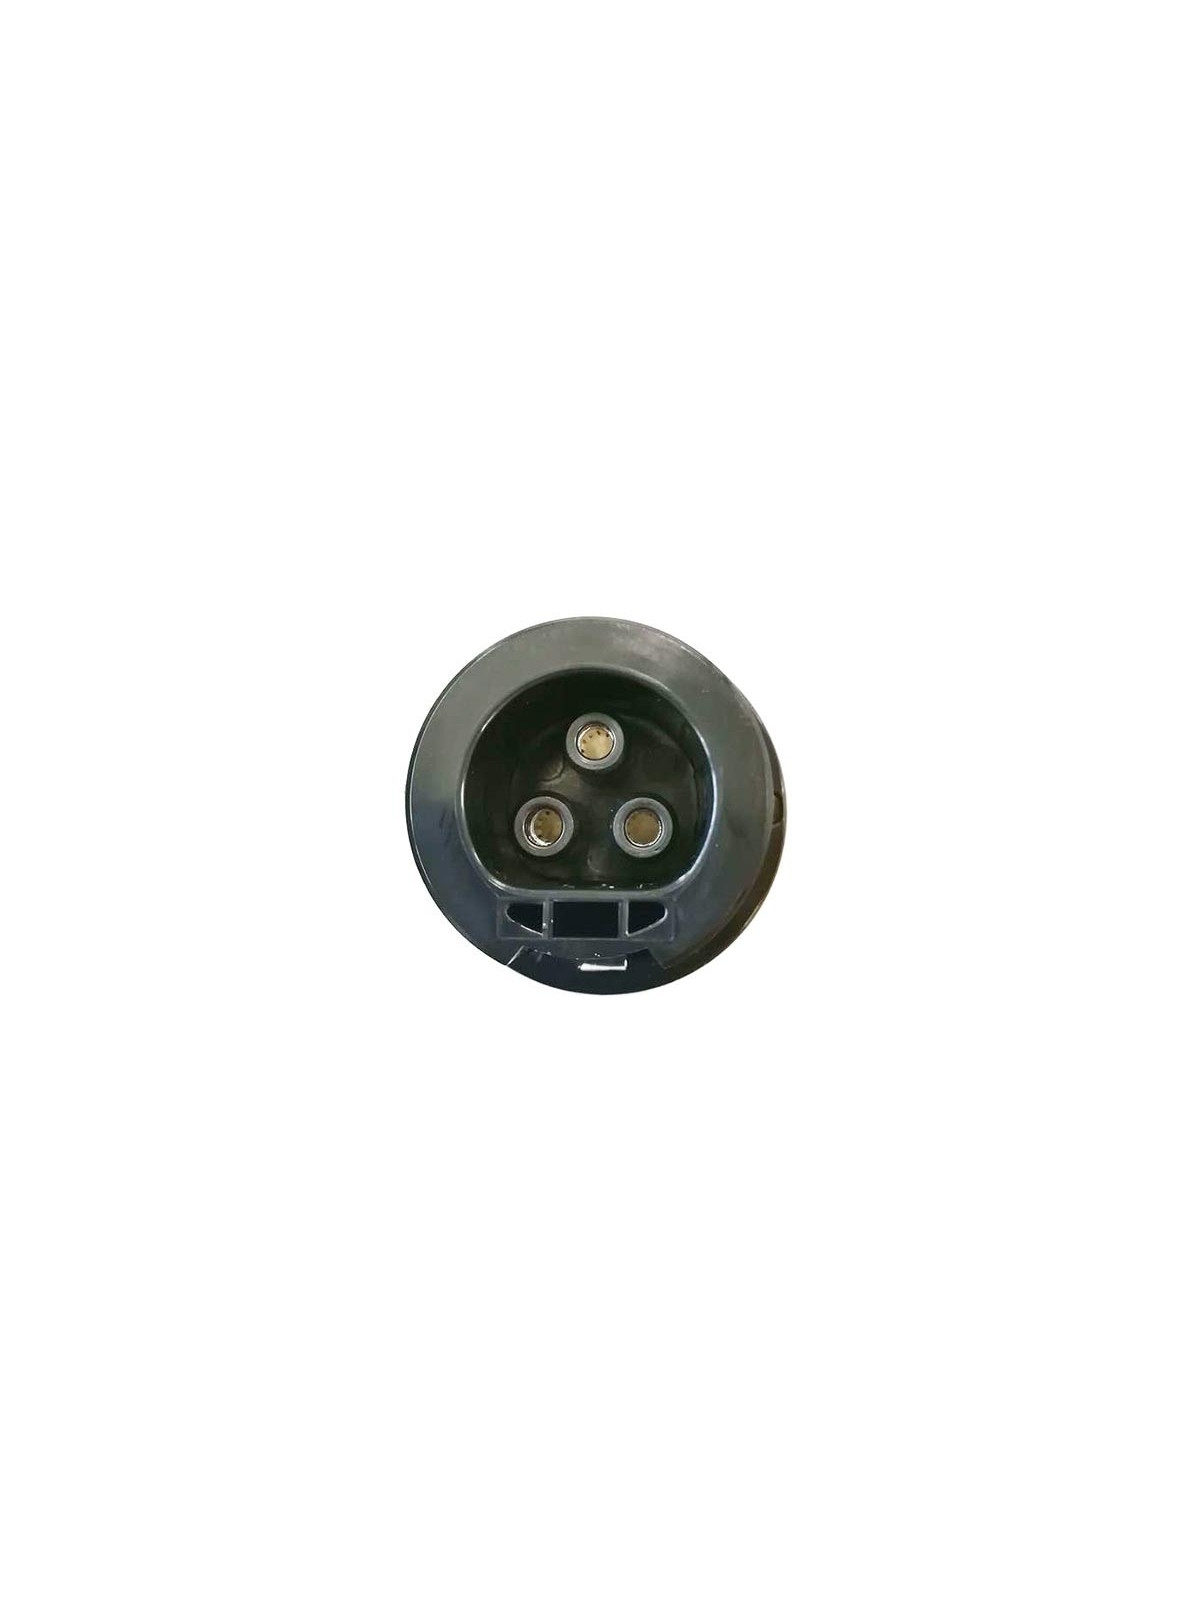 AC connector for Hoymiles micro-inverter